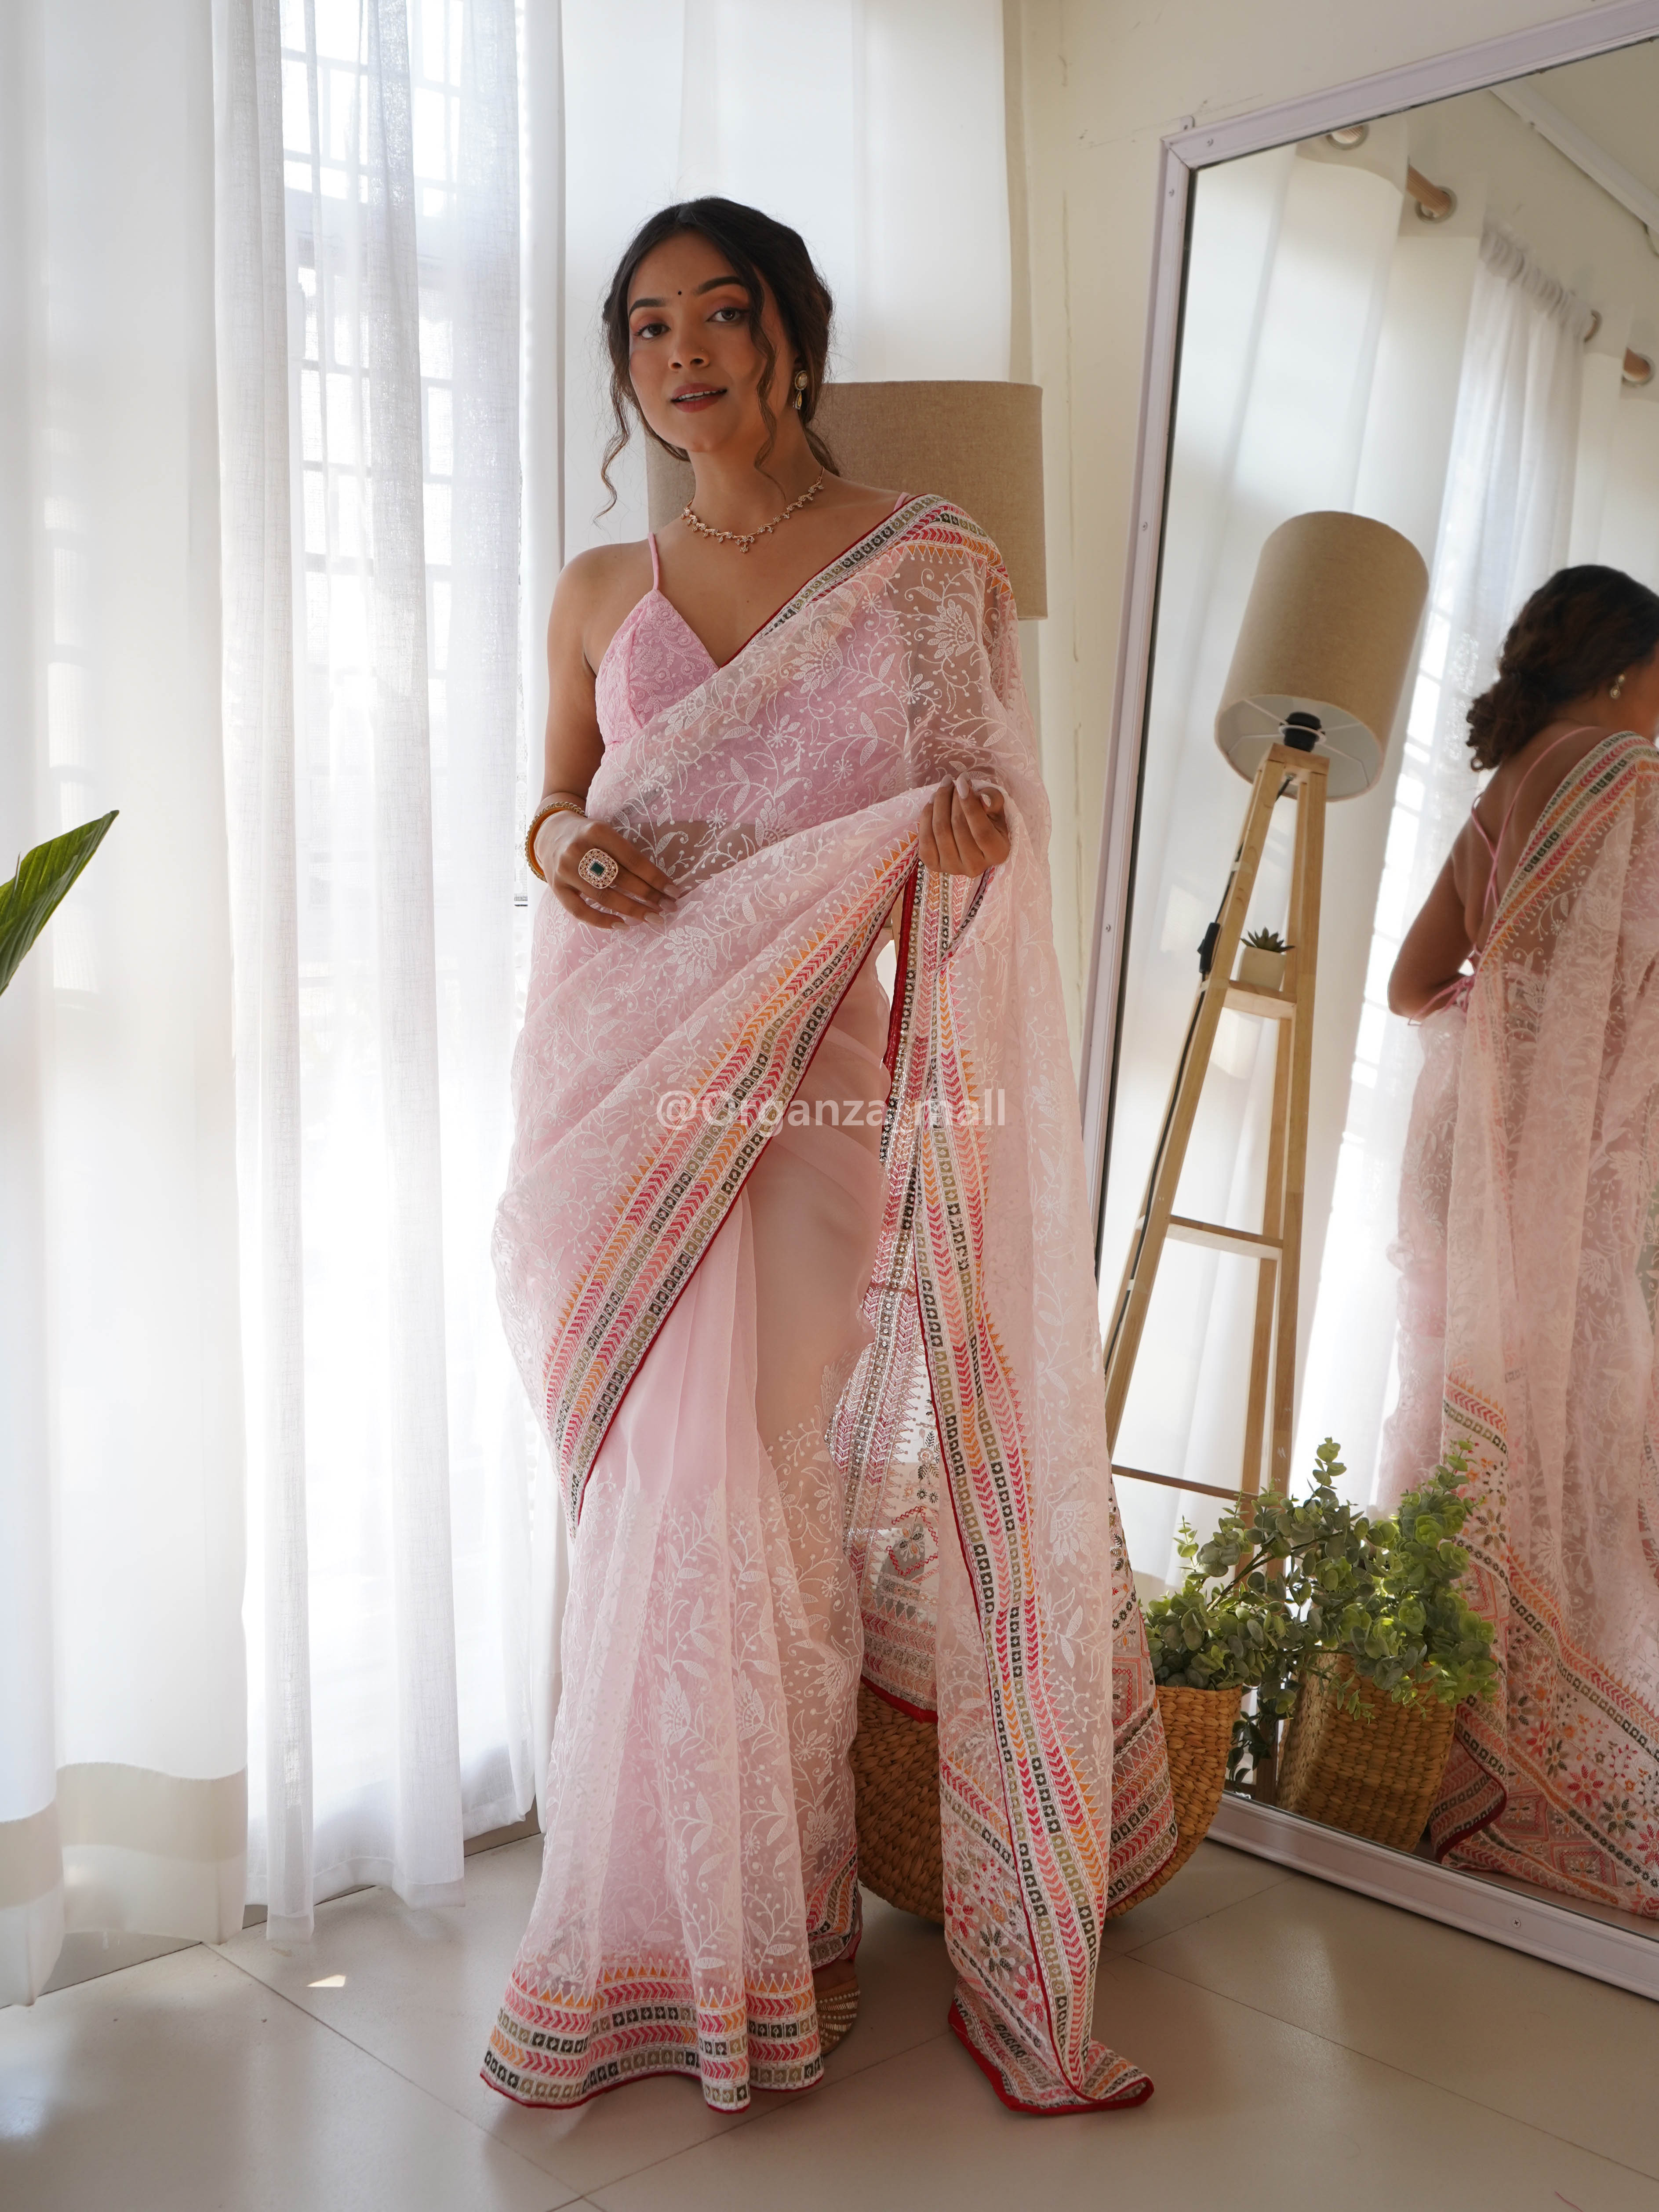 Lovely Light Pink Embroidered Georgette Saree With Dark Pink Blouse Design  at Rs 1799.00 | Georgette Sarees | ID: 2850787988748